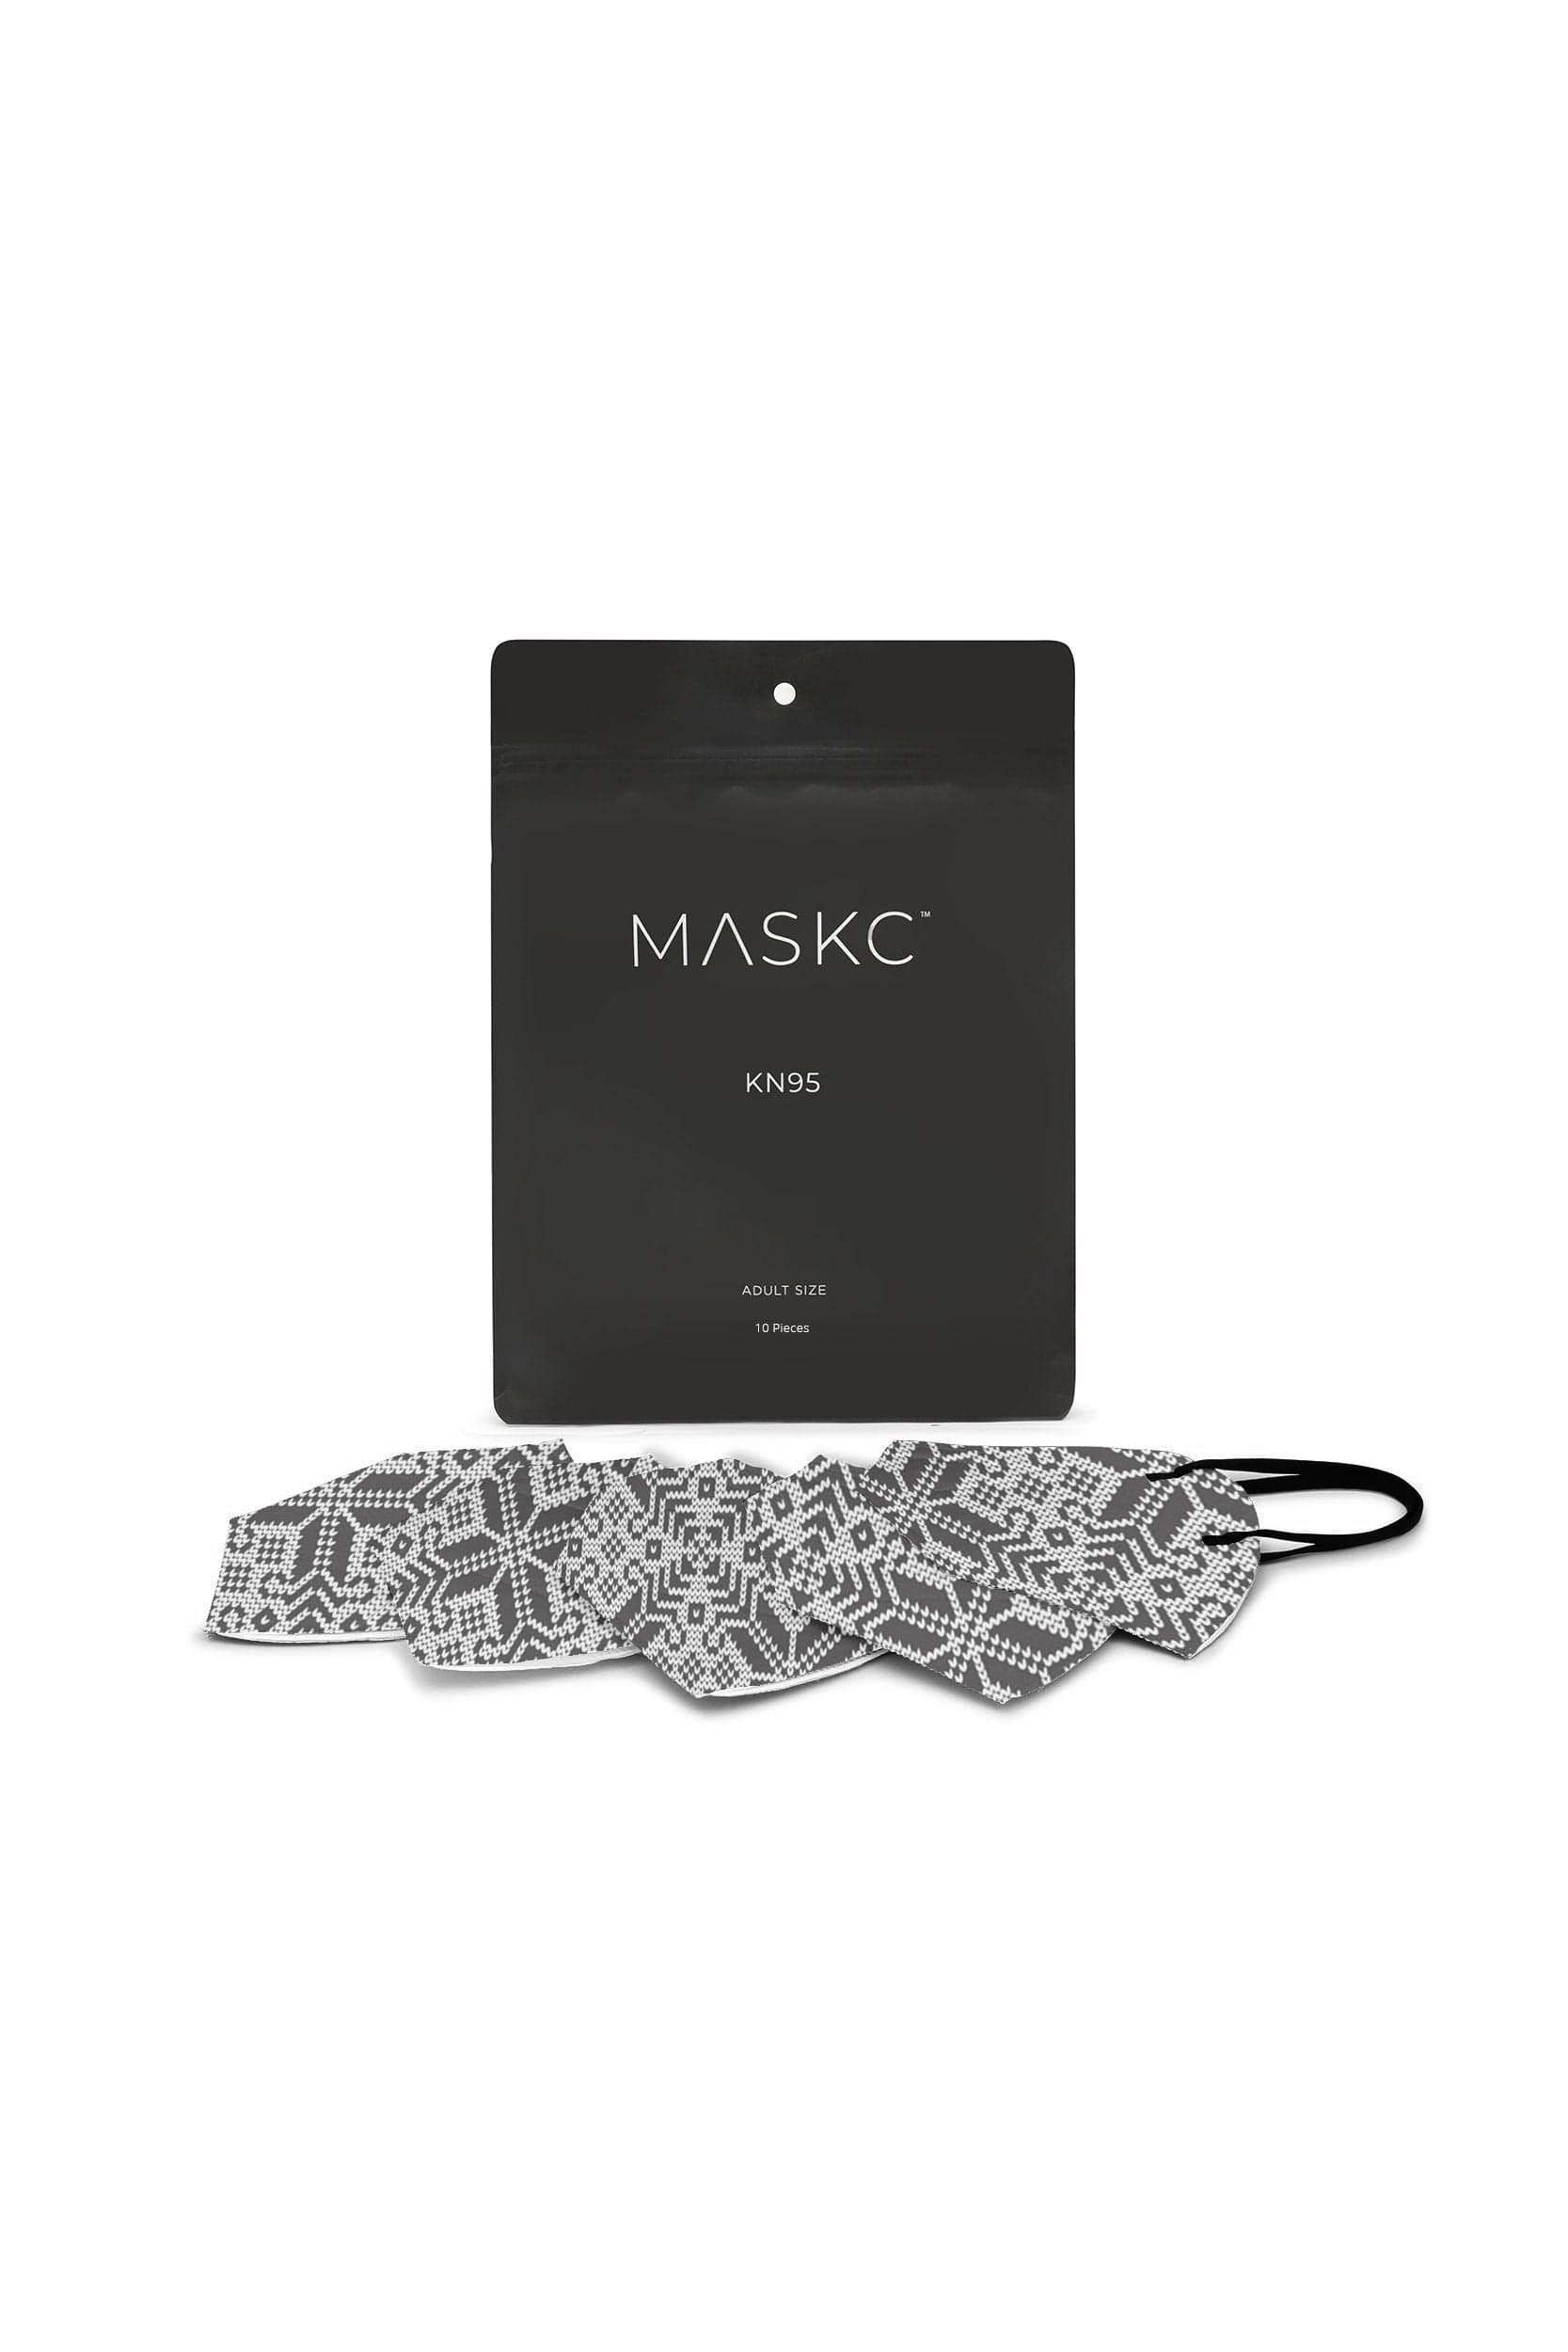 Pack of Geometric pattern printed KN95 face masks. Each pack contains stylish high quality face masks. 